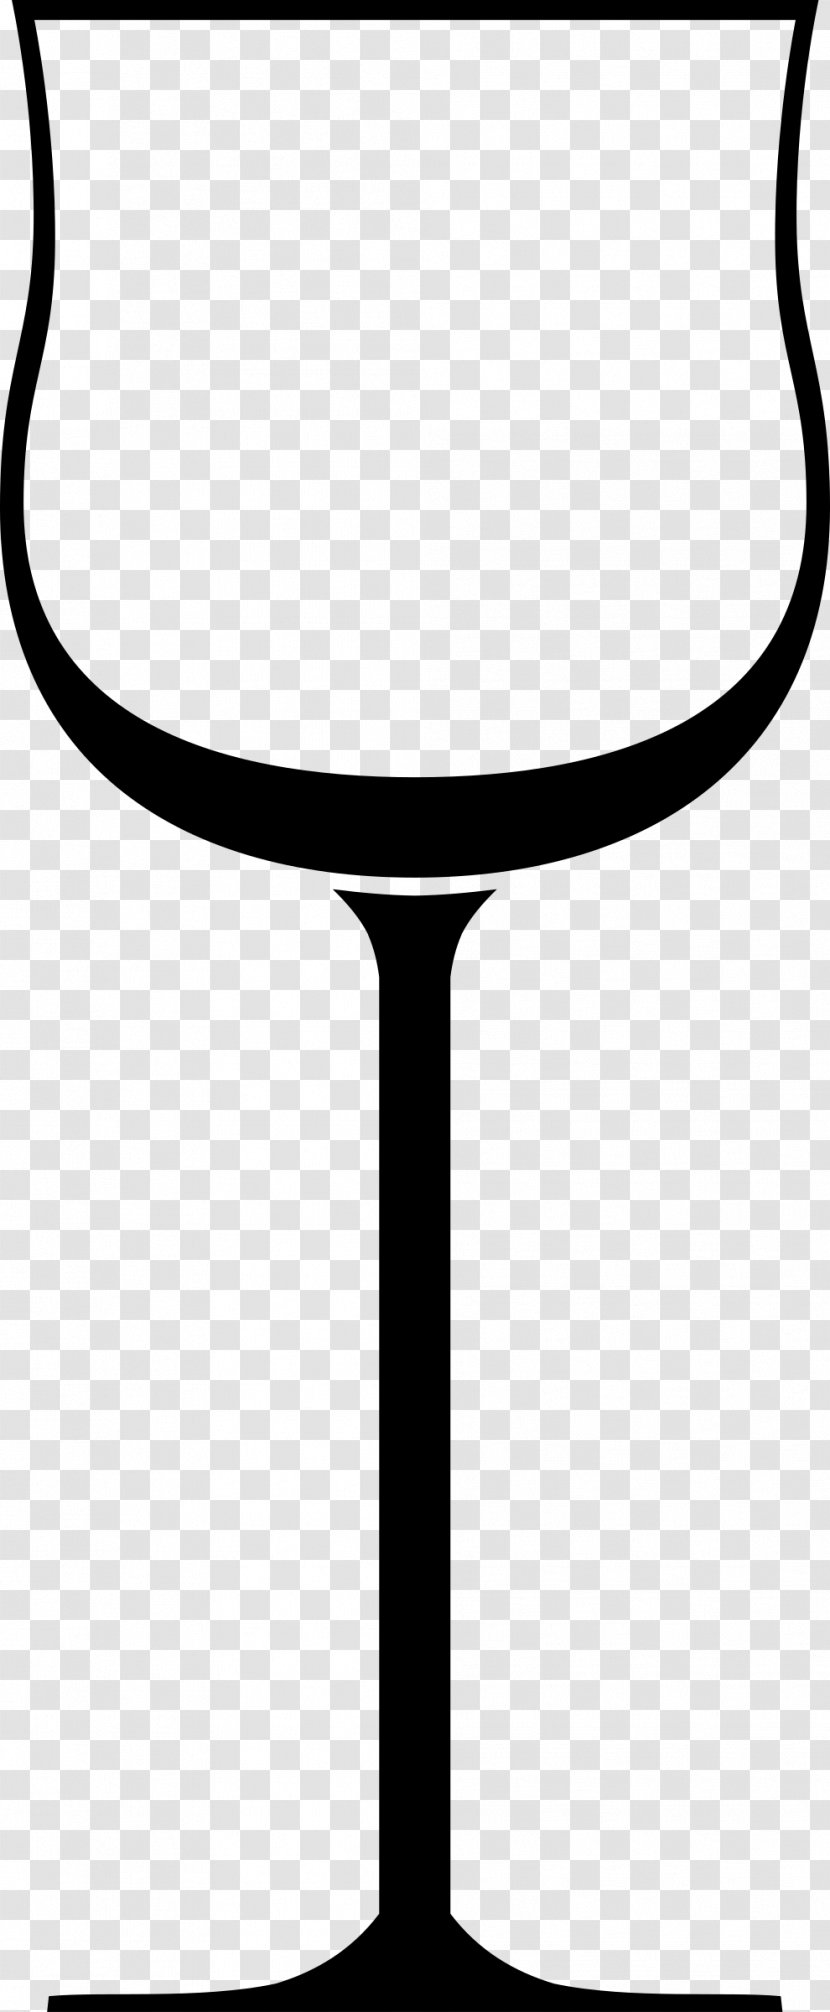 White Wine Glass Clip Art - Drink - Wineglass Transparent PNG